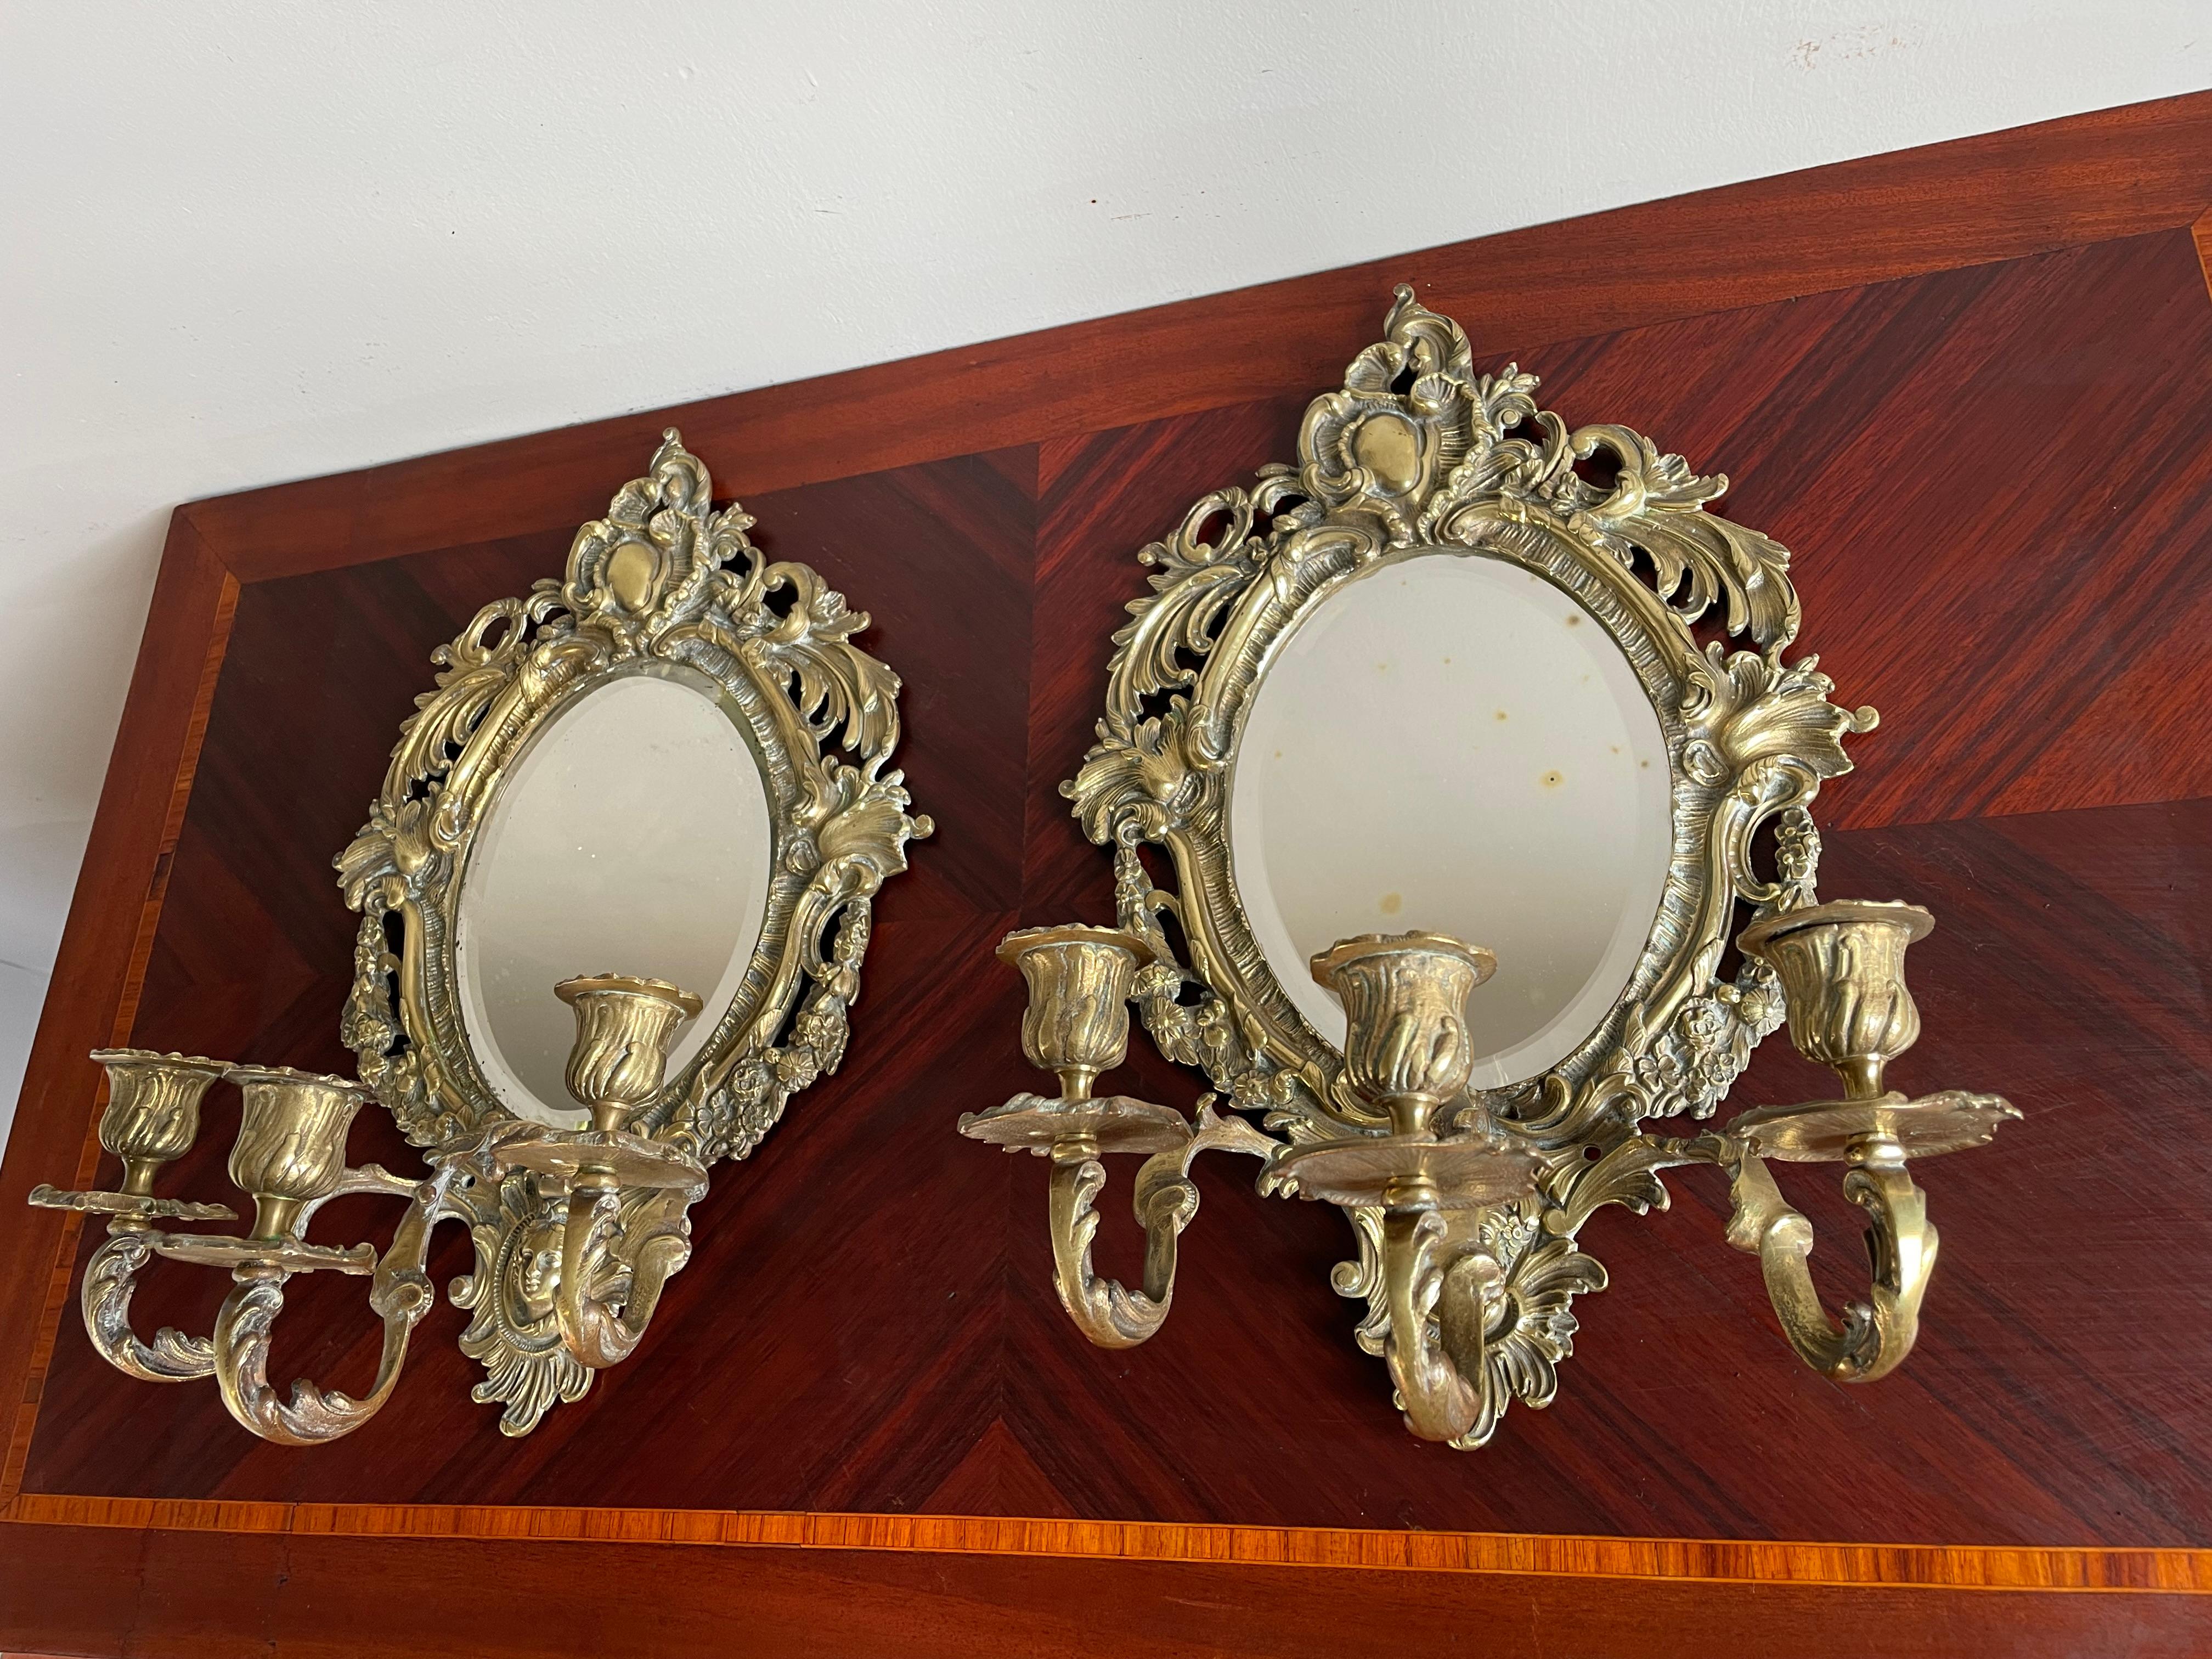 Antique Pair of Bronze Wall Sconce Candelabras w. Beveled Mirrors & Goddess Mask For Sale 4